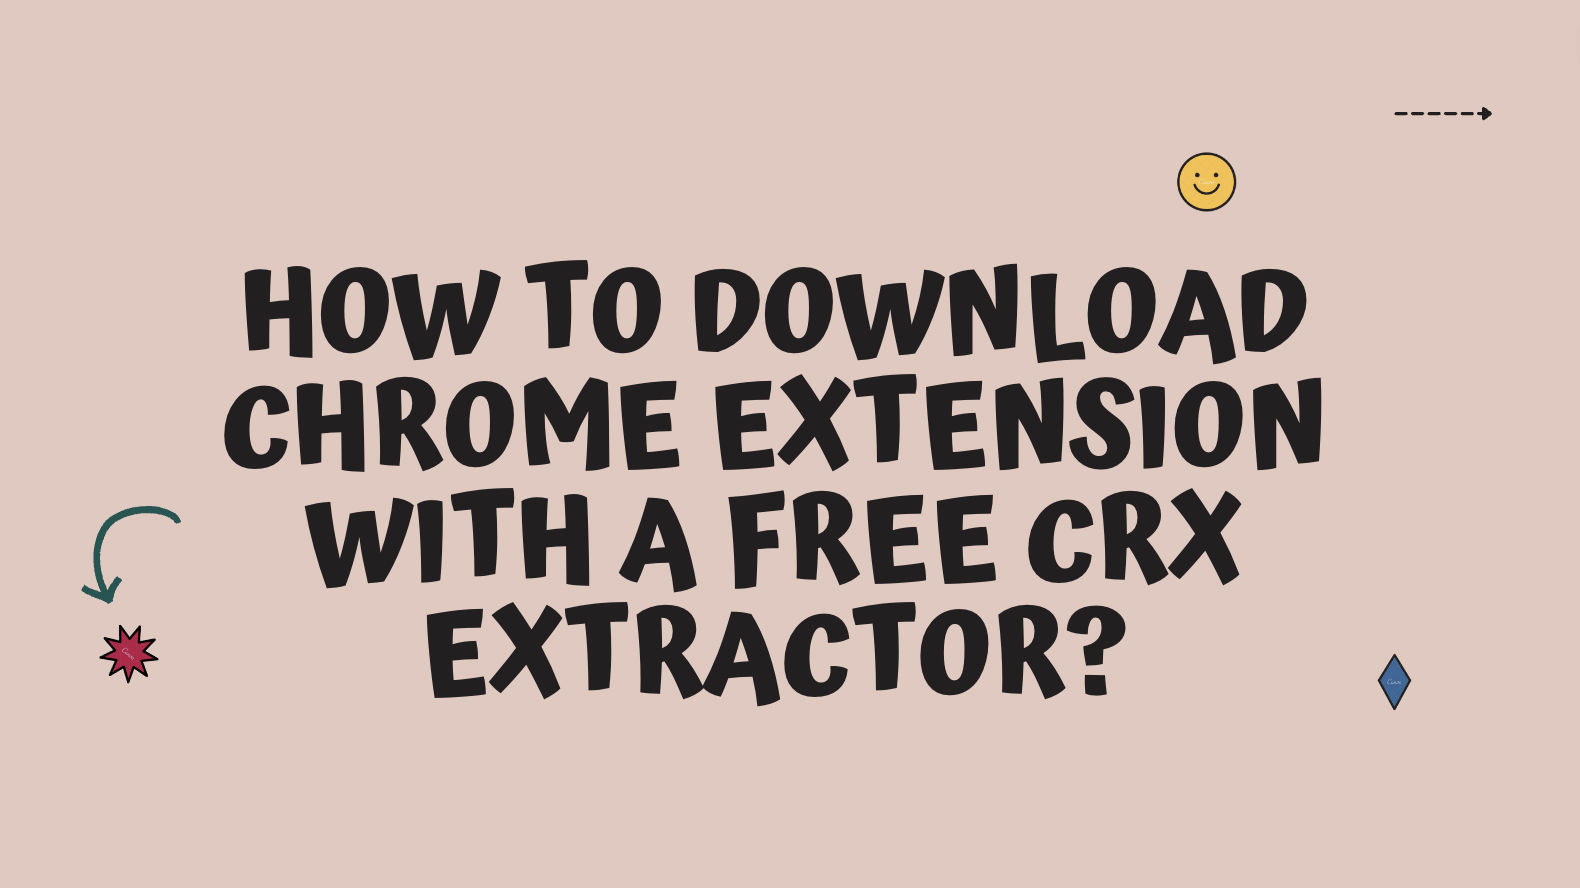 How to Download Chrome Extension with A Free CRX Extractor?